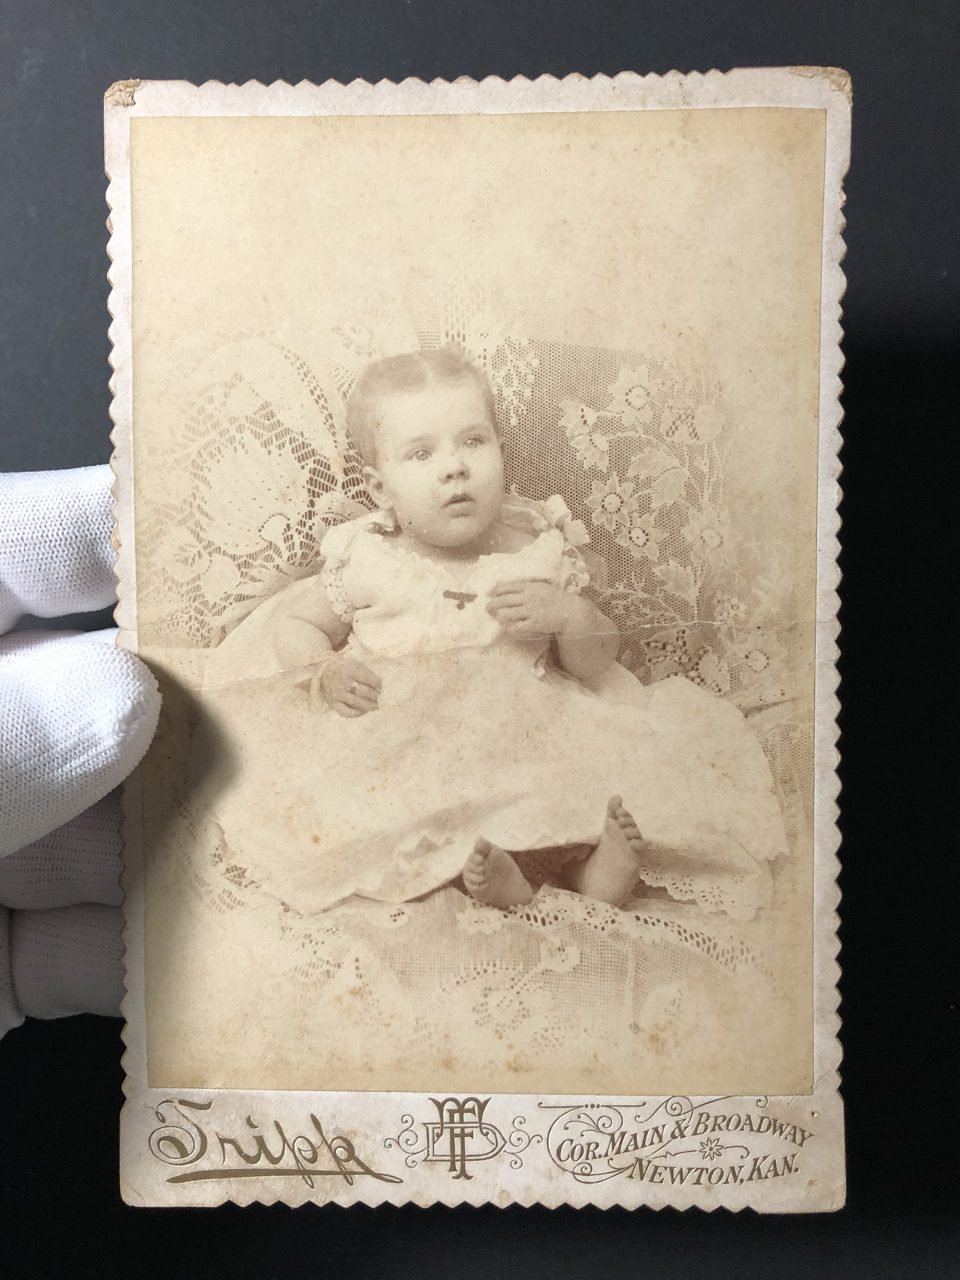 This toddler did a great job holding still for the lens of F.D. Tripp in Newton, Kansas in the 1880s or 1890s. The print style includes a heavy white vignette.